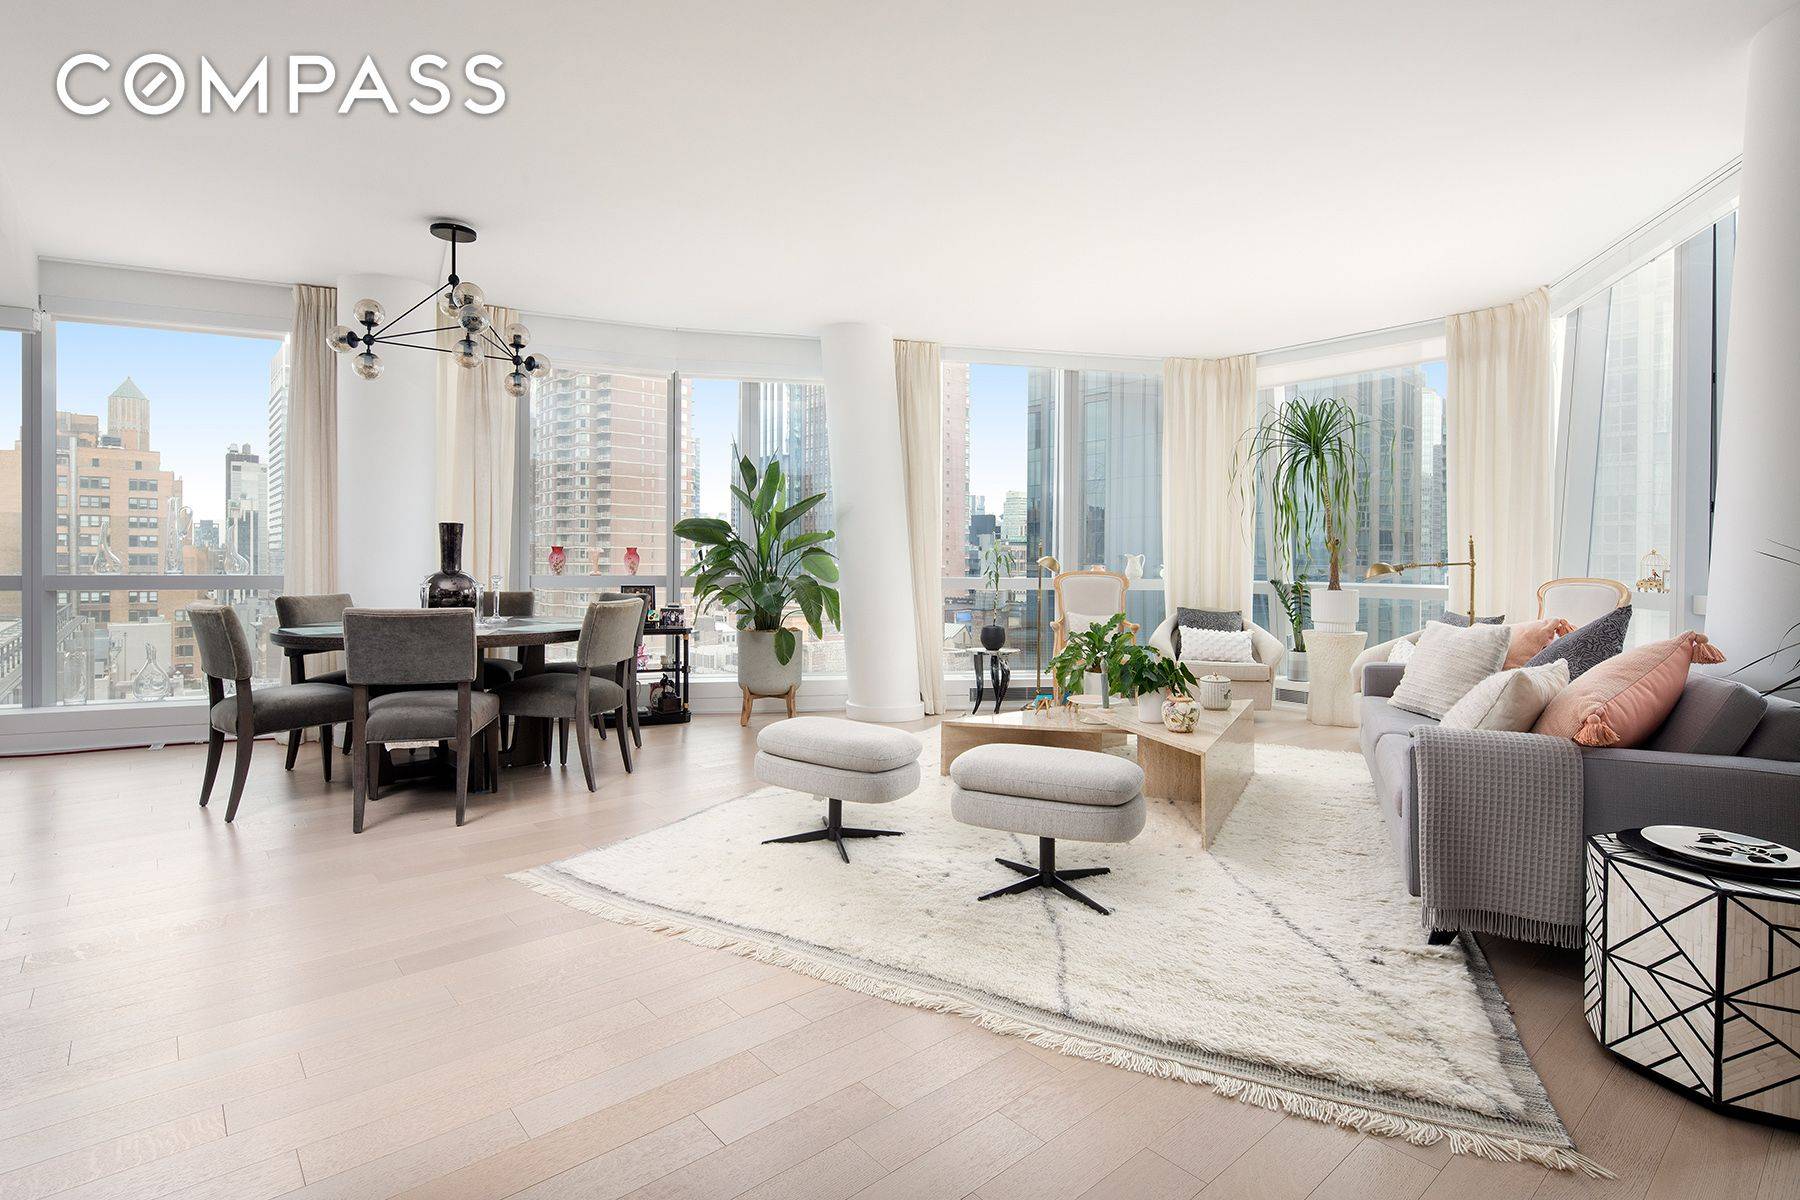 Welcome to 400 Park Avenue South, a masterpiece crafted by the renowned Pritzker Prize winning architect, Christian de Portzamparc.